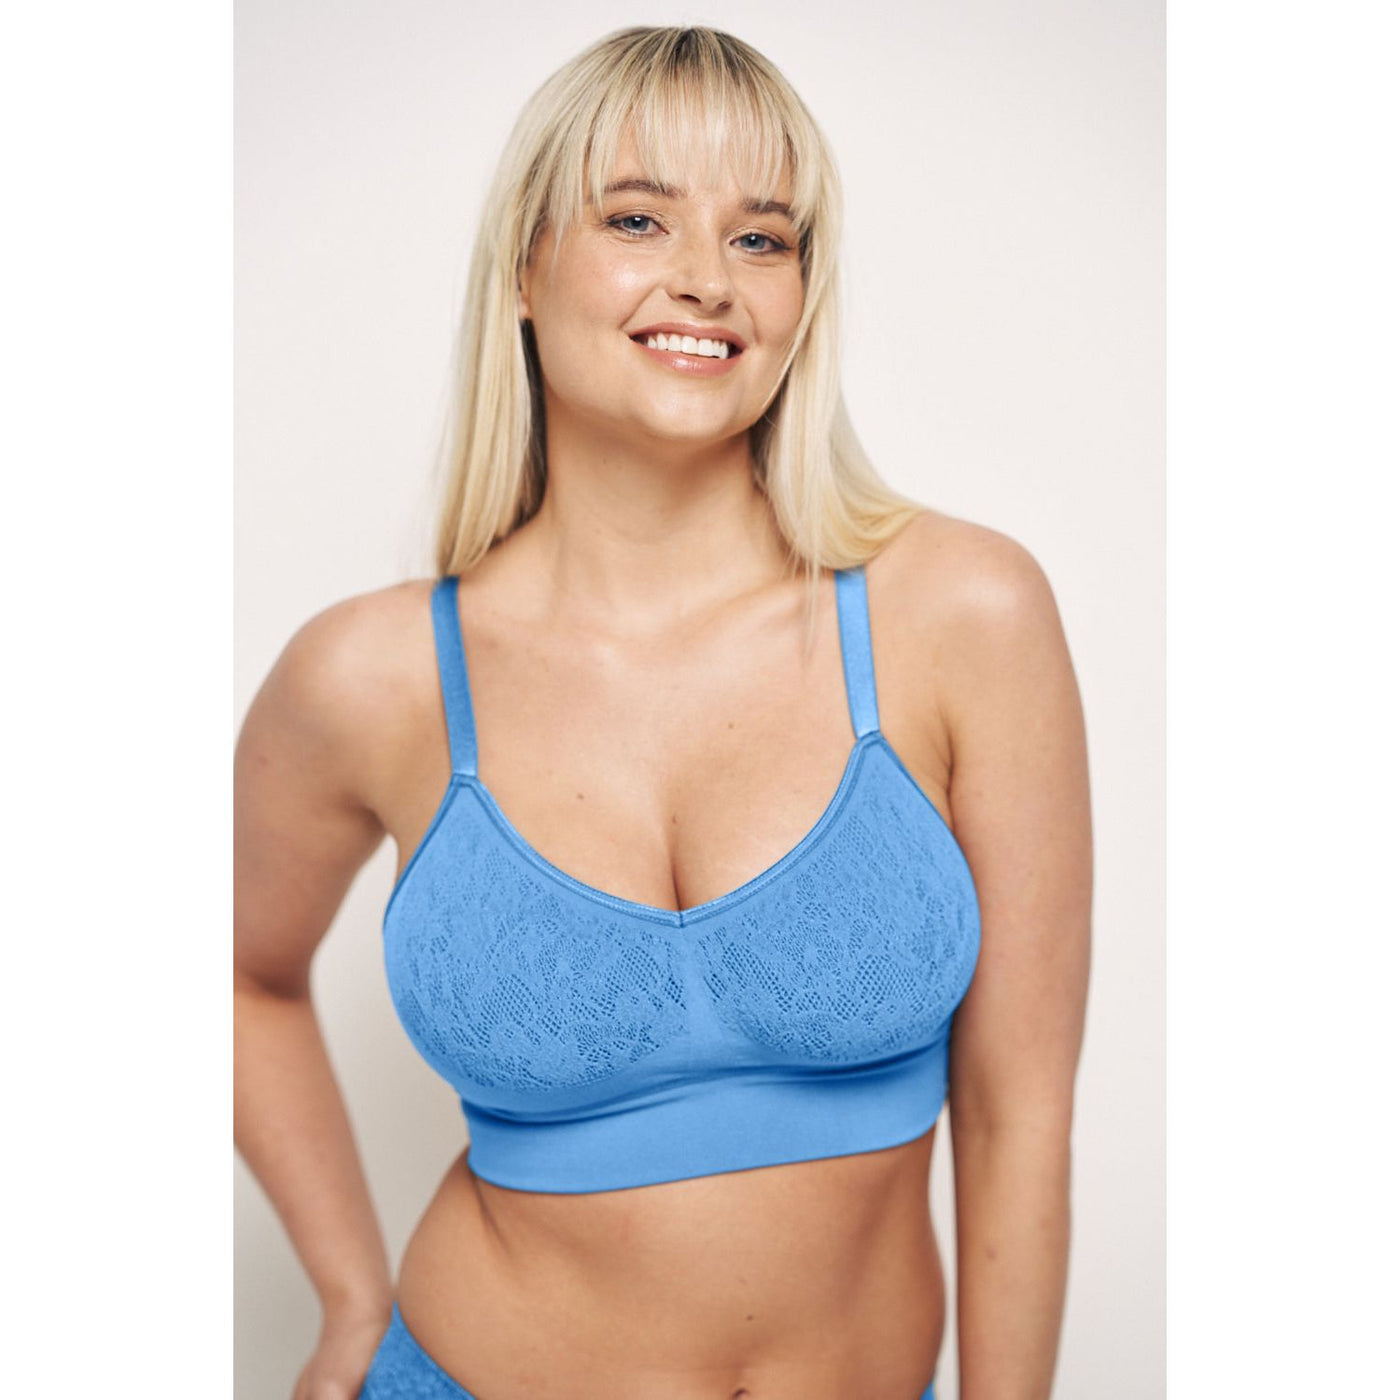 The Mid V Lined Wire-free Bra - Sky